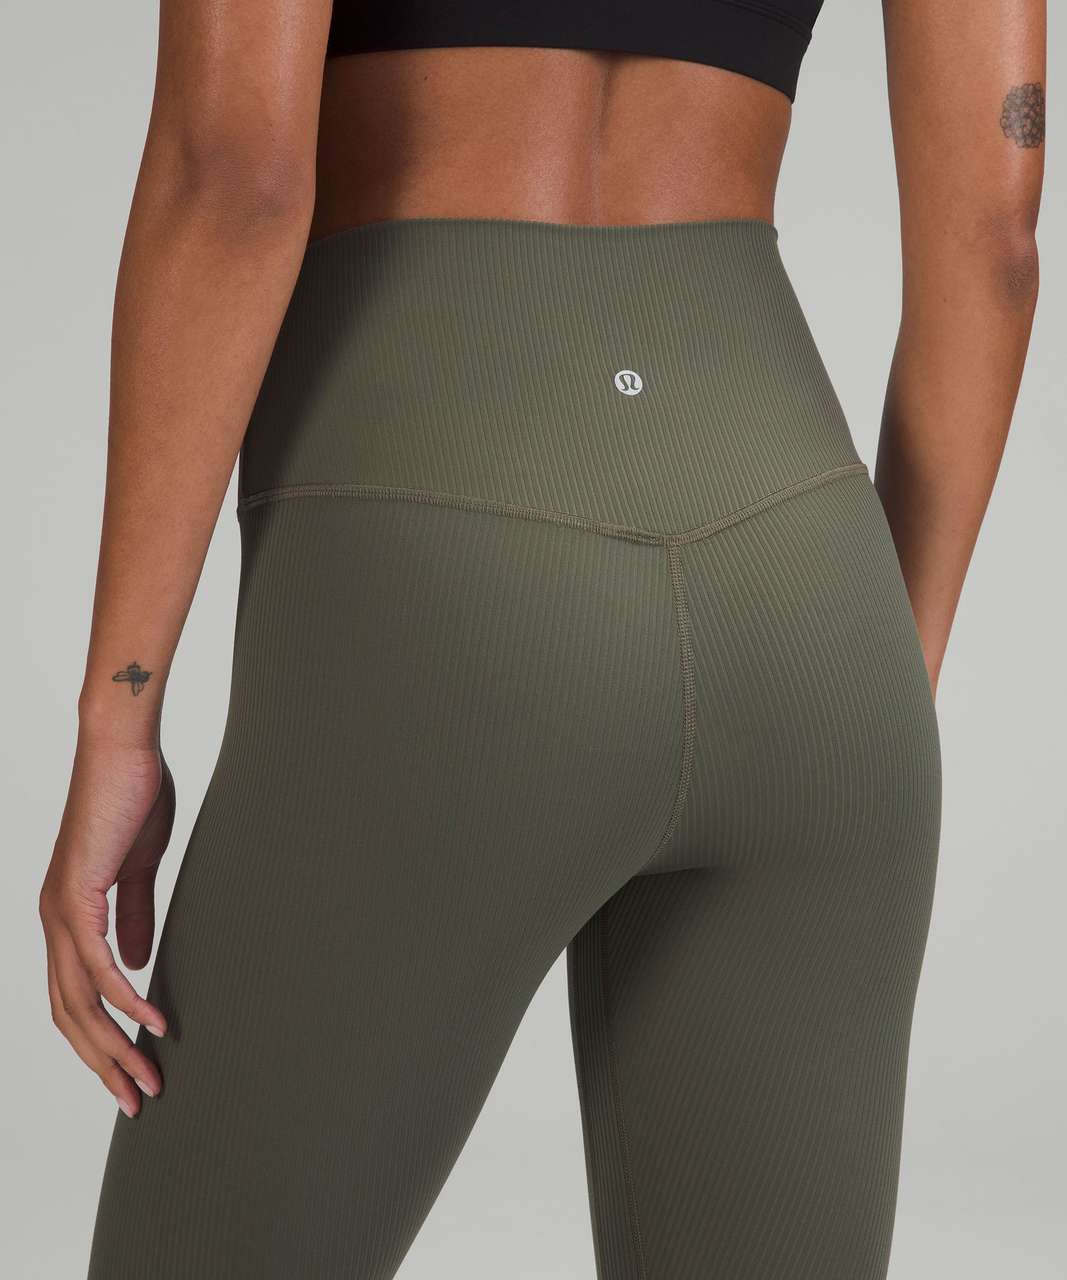 Lululemon Align Ribbed High-Rise Pant 25" - Army Green